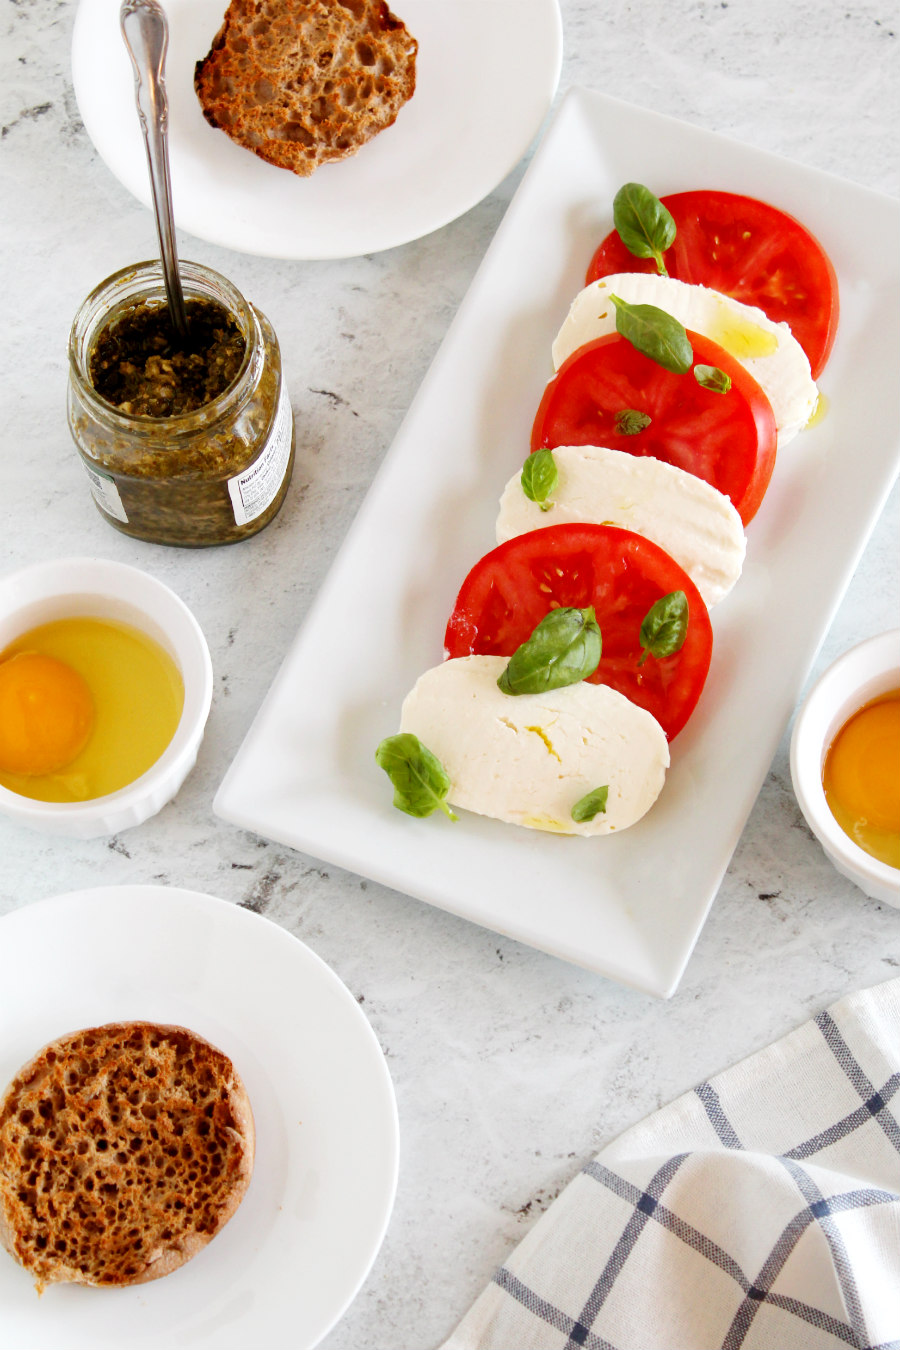 If you enjoy the traditional Italian flavors of Caprese Salad, you'll love this Poached Eggs Caprese recipe. Poached eggs on English muffins with tomato, basil, pesto, and fresh mozzarella for a hearty breakfast or Sunday brunch!